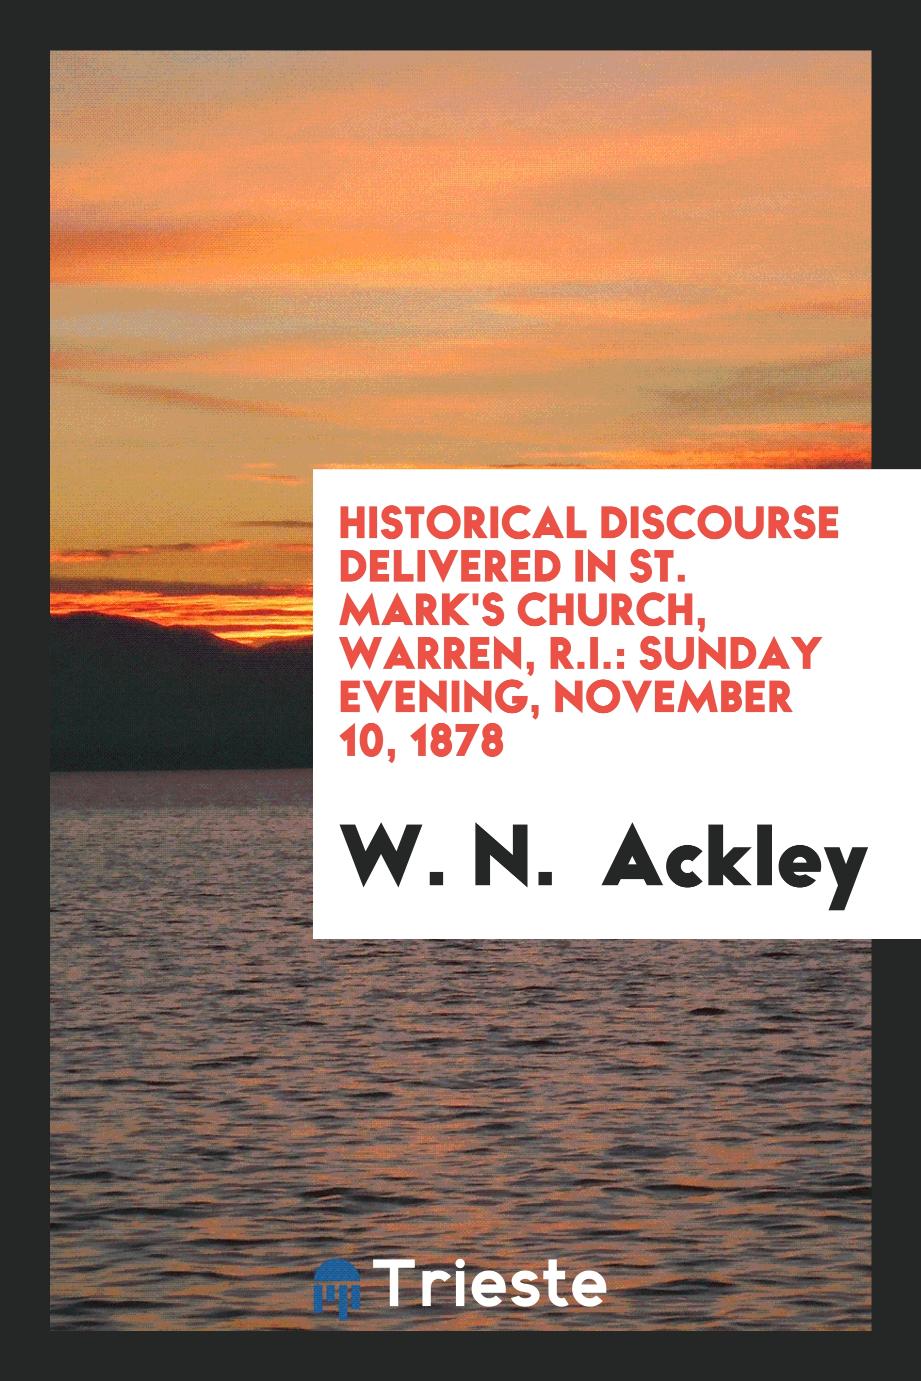 Historical Discourse Delivered in St. Mark's Church, Warren, R.I.: Sunday Evening, November 10, 1878